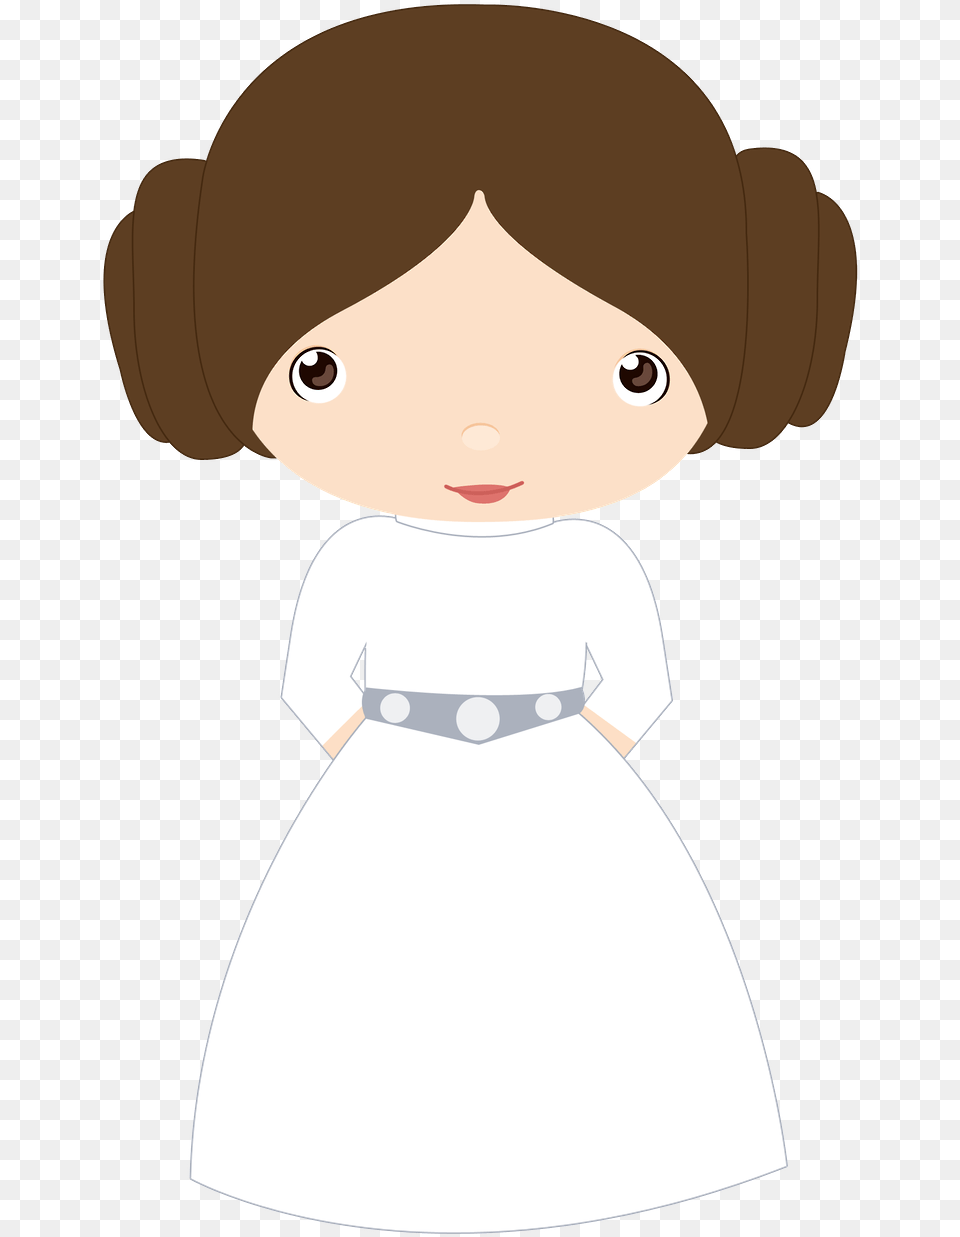 Star Wars Star Wars Princesa Leia, Doll, Toy, Baby, Person Png